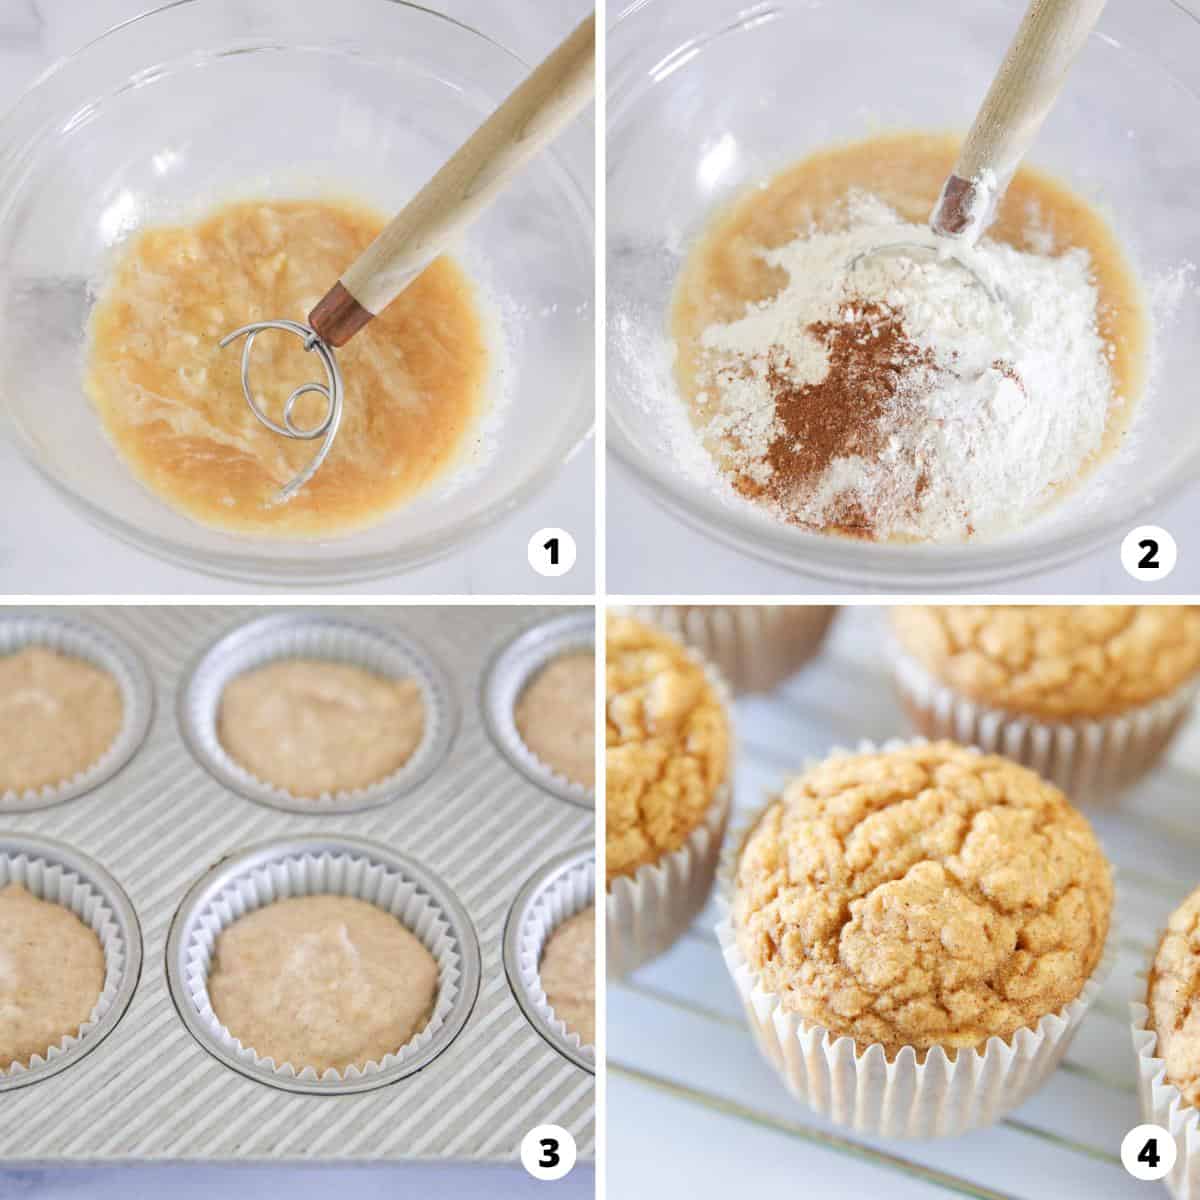 Showing how to make applesauce muffins in a 4 step collage.